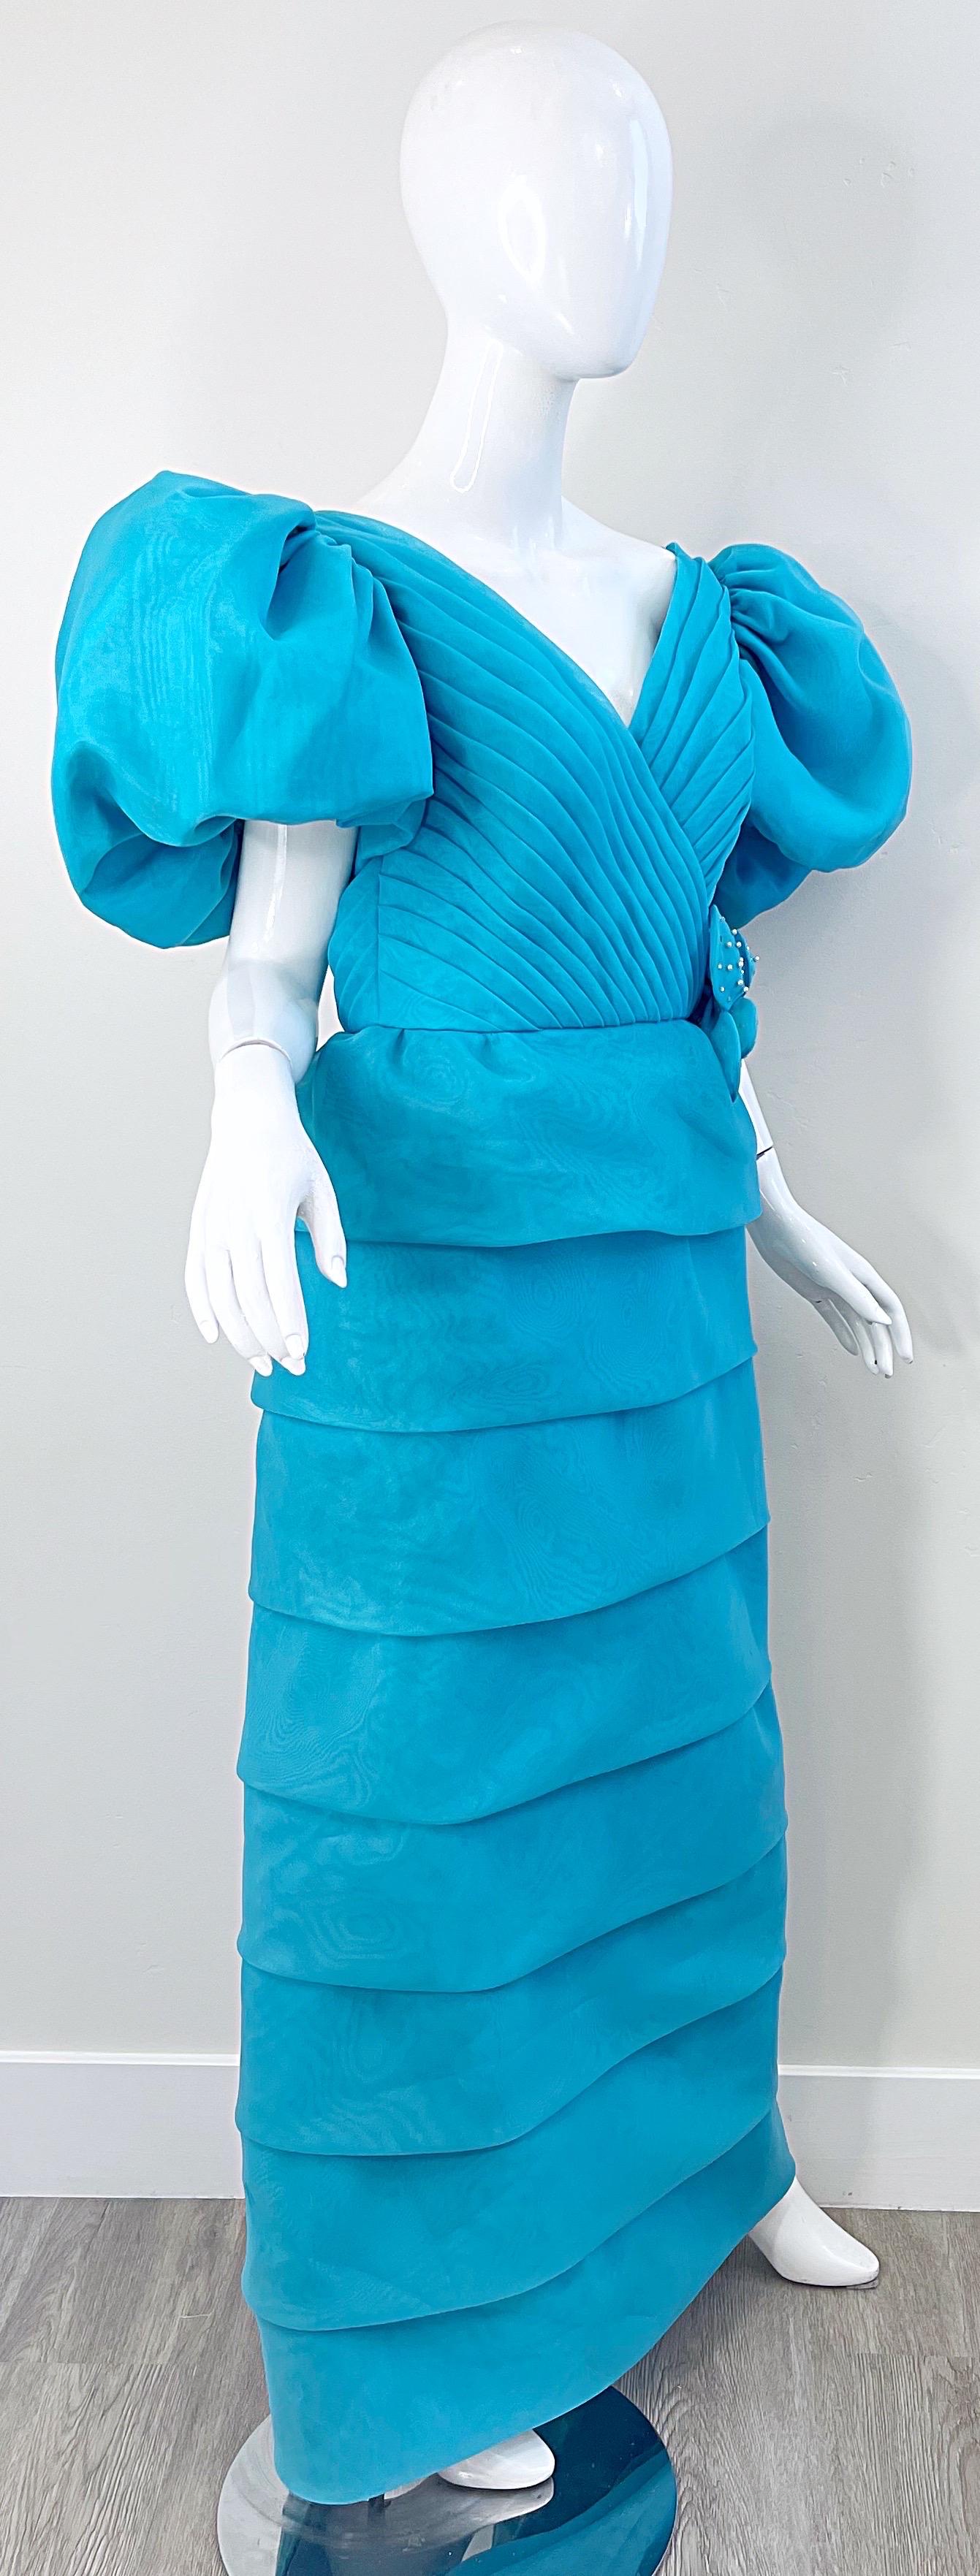 Rose Taft Couture 1980s NWT Turquoise Blue Chiffon Puff Sleeve 80s Vintage Gown For Sale 4